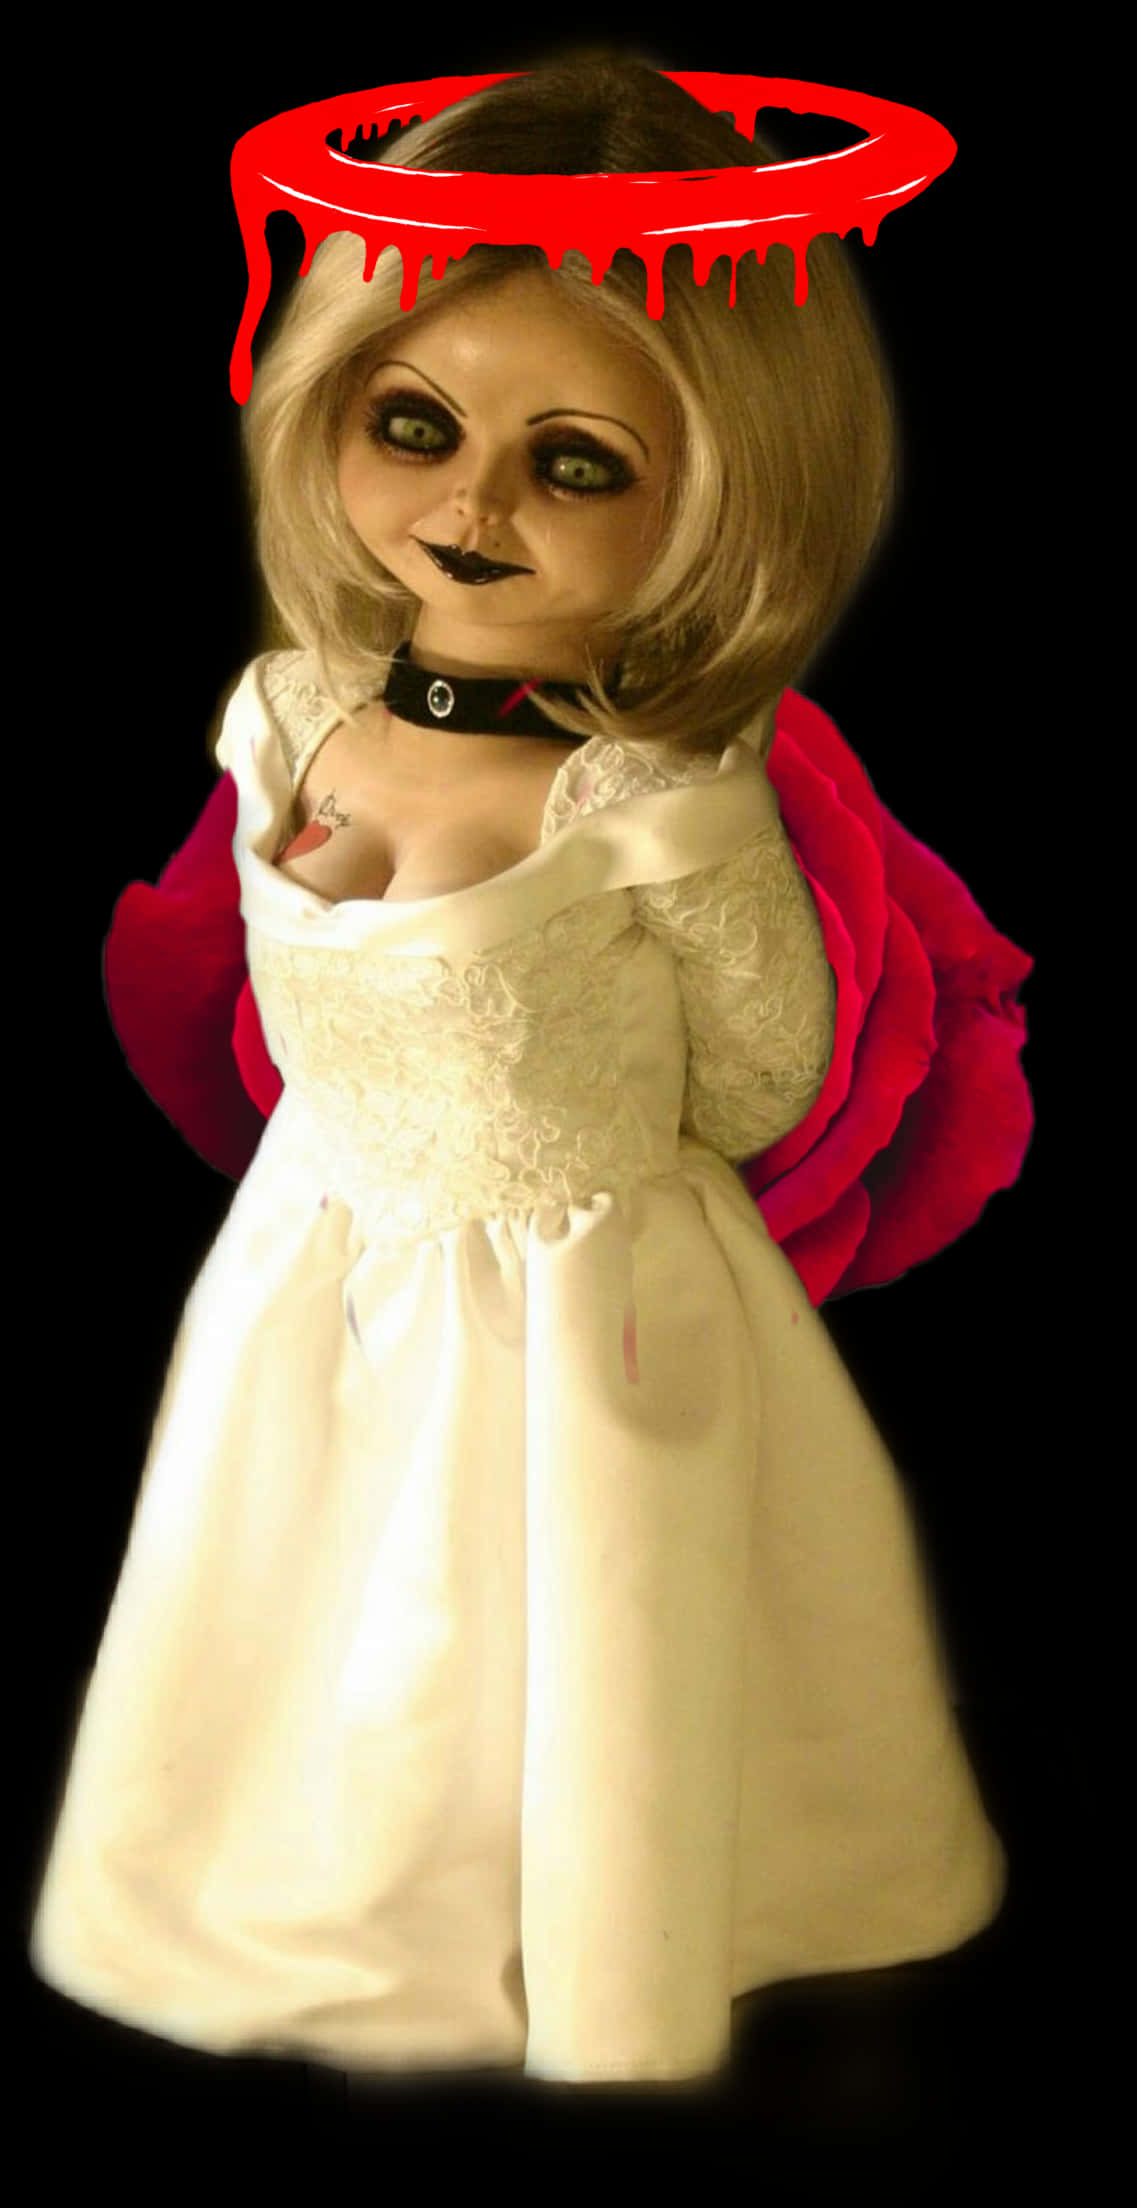 A Doll In A White Dress